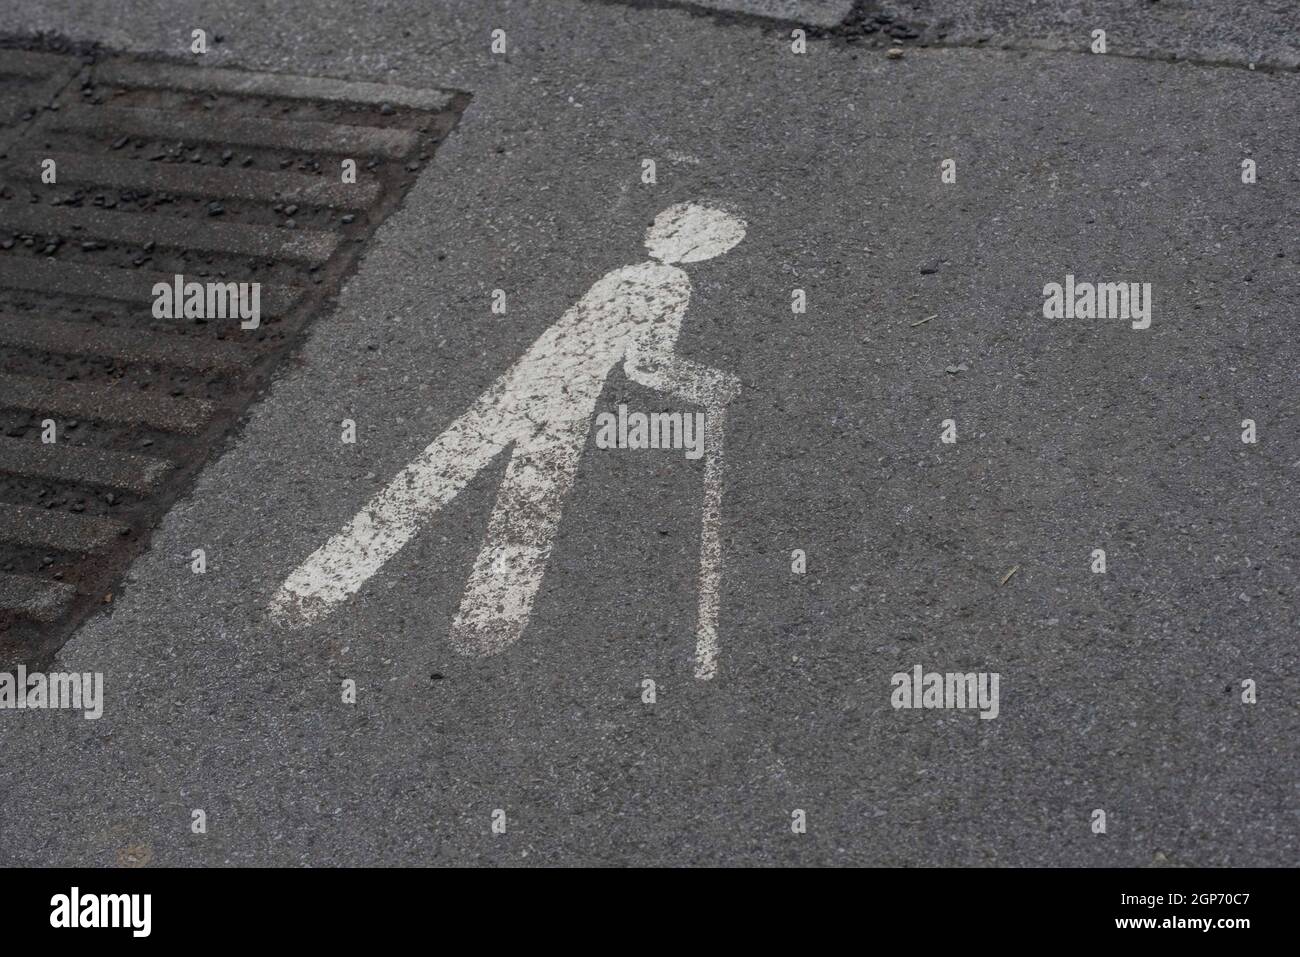 a walking aid and accessibility sign, marking on the street Stock Photo